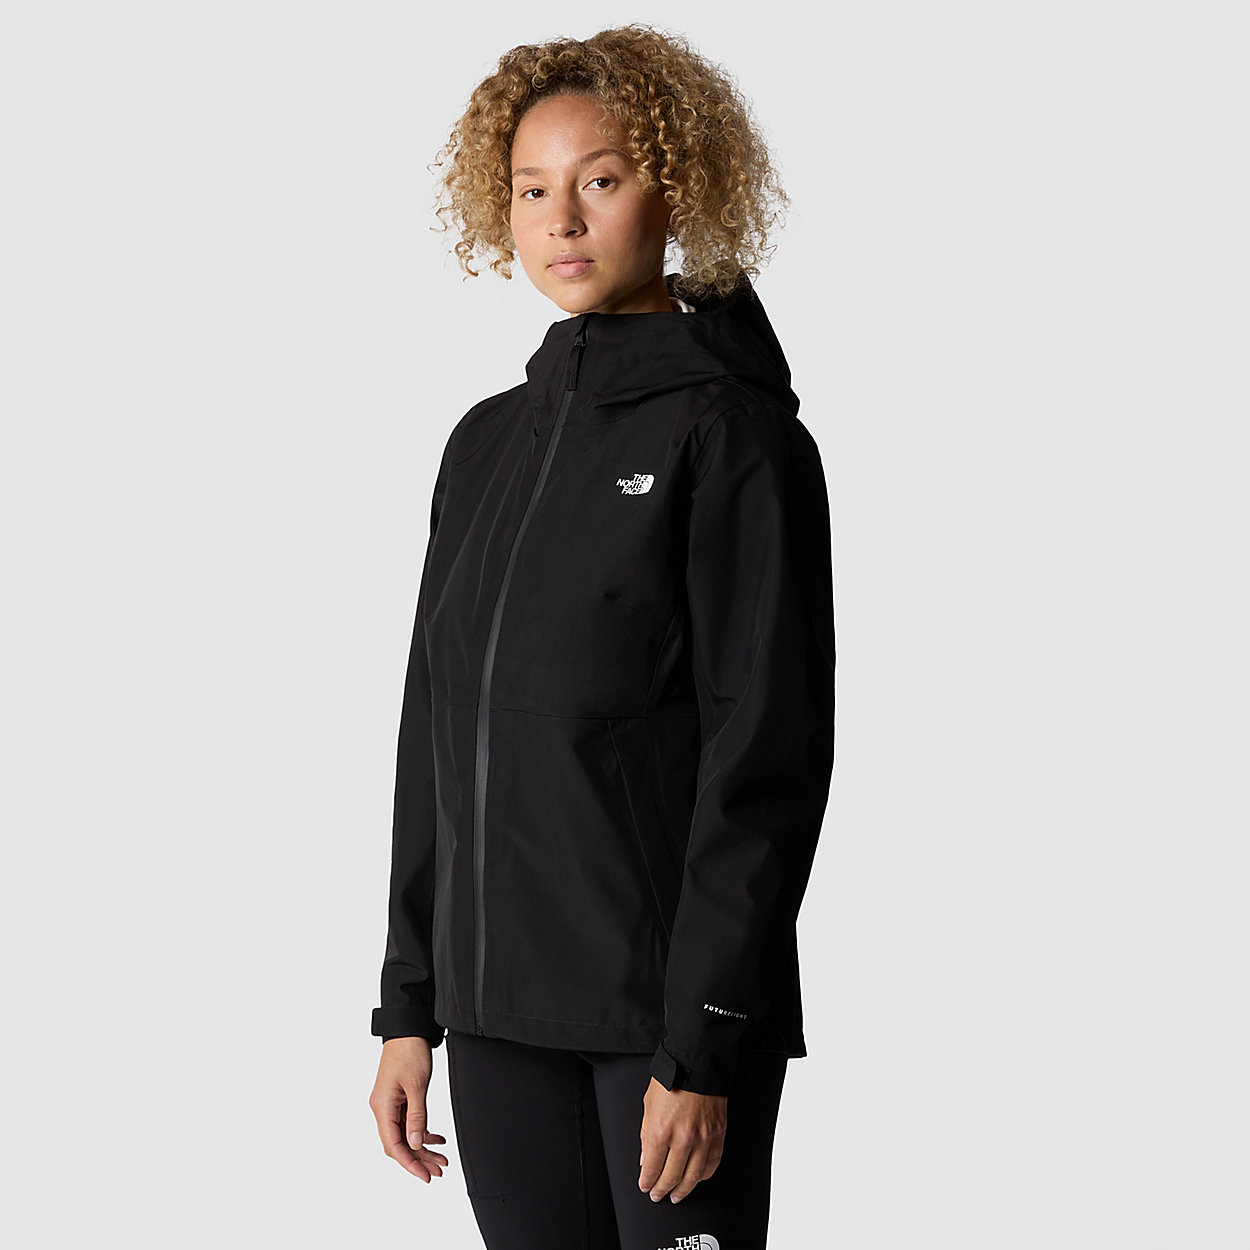 Unlock Wilderness' choice in the Mountain Equipment Vs North Face comparison, the Dryzzle Futurelight Jacket by The North Face